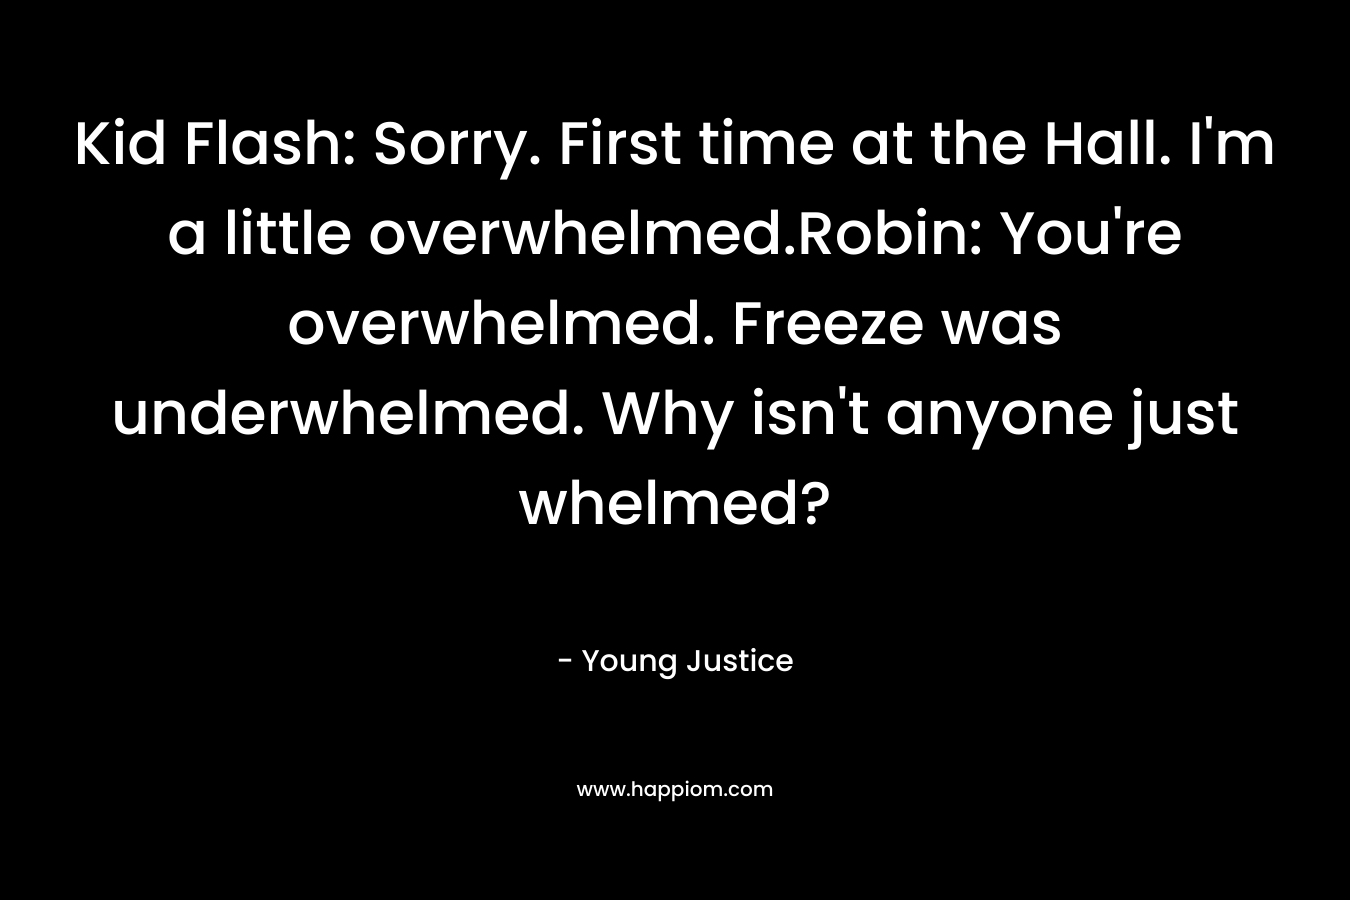 Kid Flash: Sorry. First time at the Hall. I’m a little overwhelmed.Robin: You’re overwhelmed. Freeze was underwhelmed. Why isn’t anyone just whelmed? – Young Justice